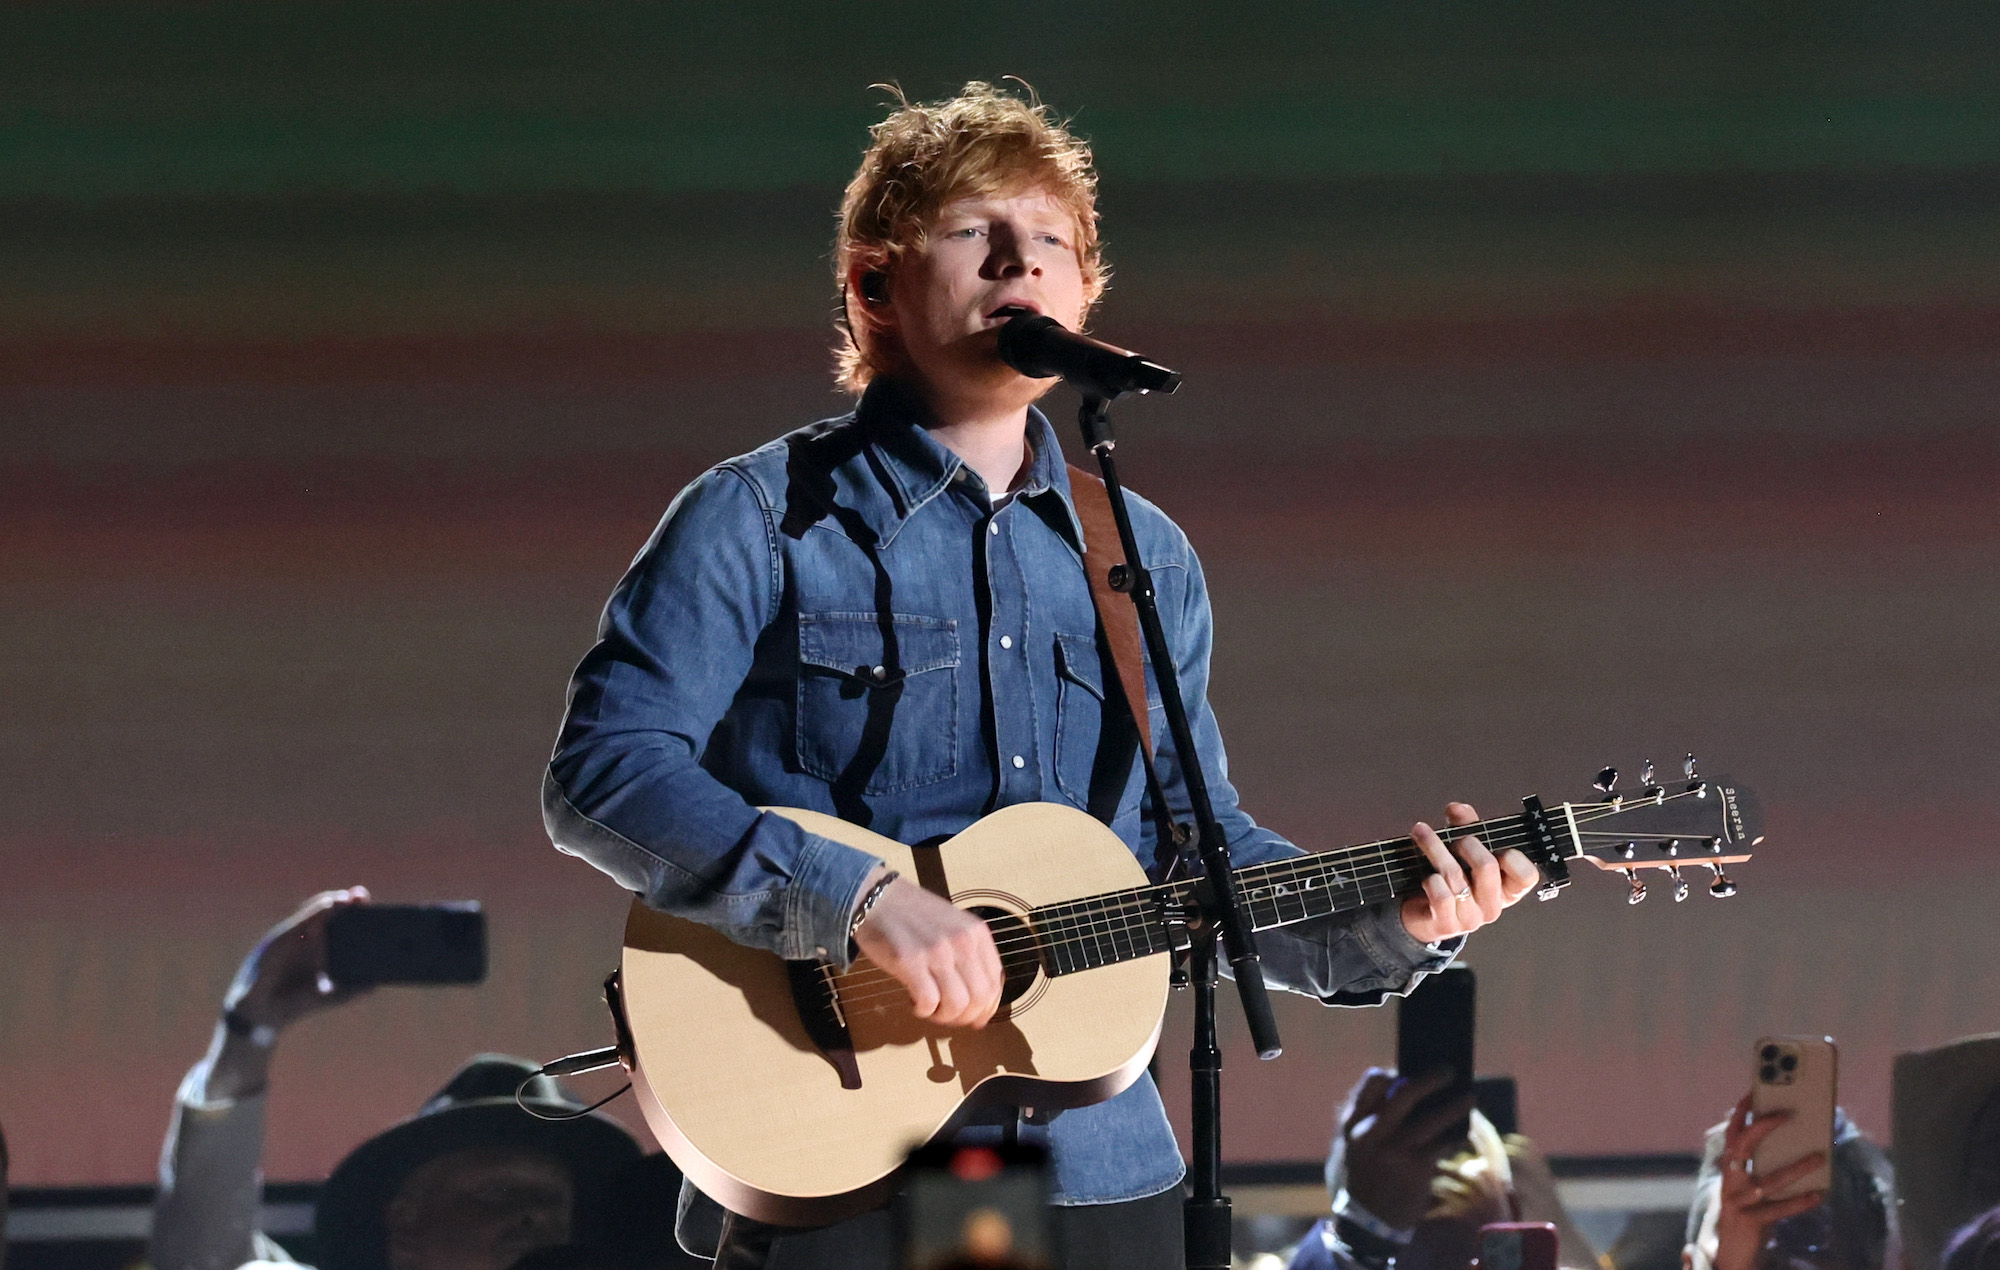 Ed Sheeran cancels Las Vegas gig at last minute due to production issues